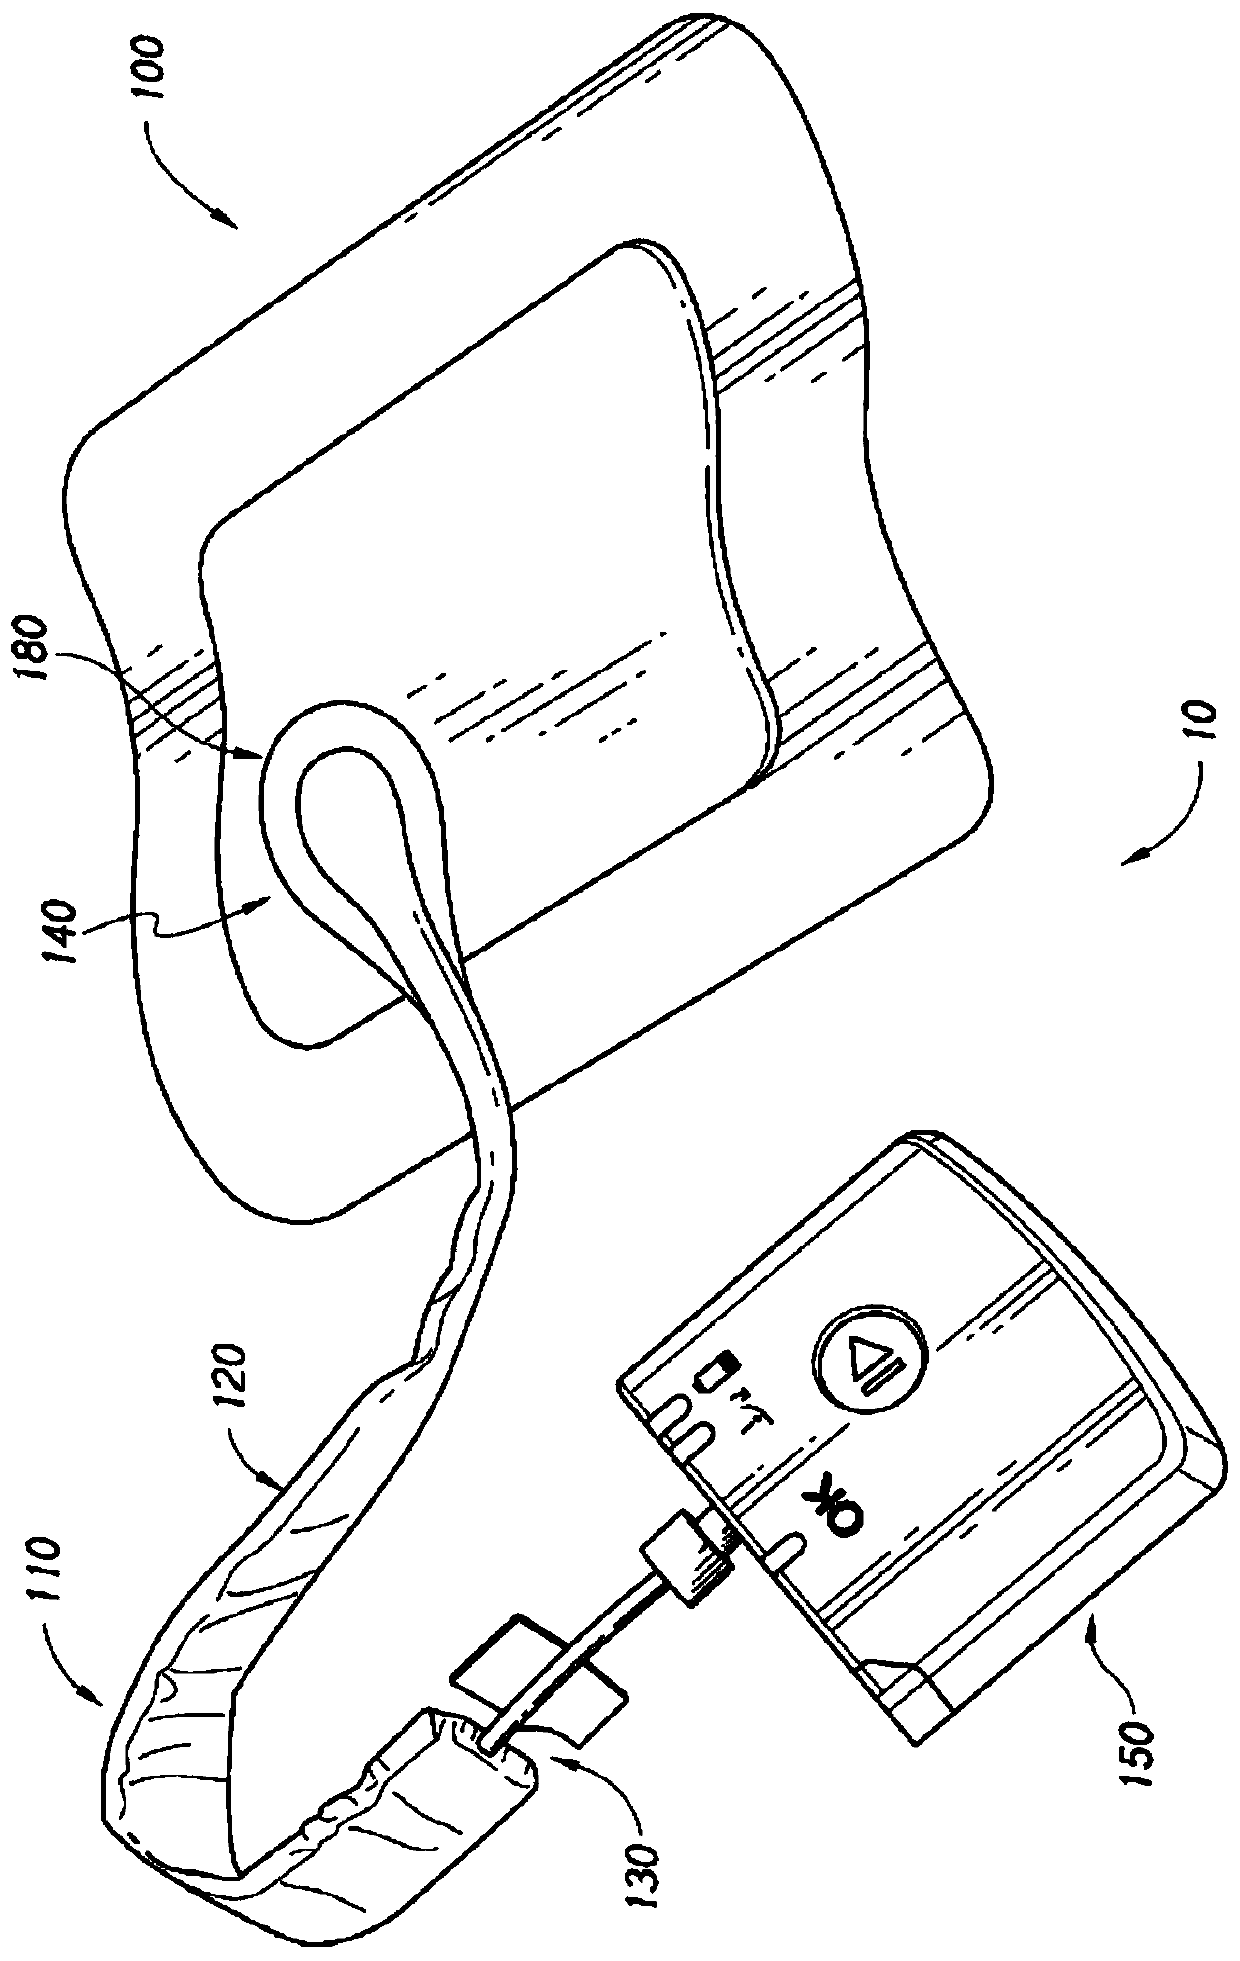 PH sensing for sensor enabled negative pressure wound monitoring and therapy apparatuses